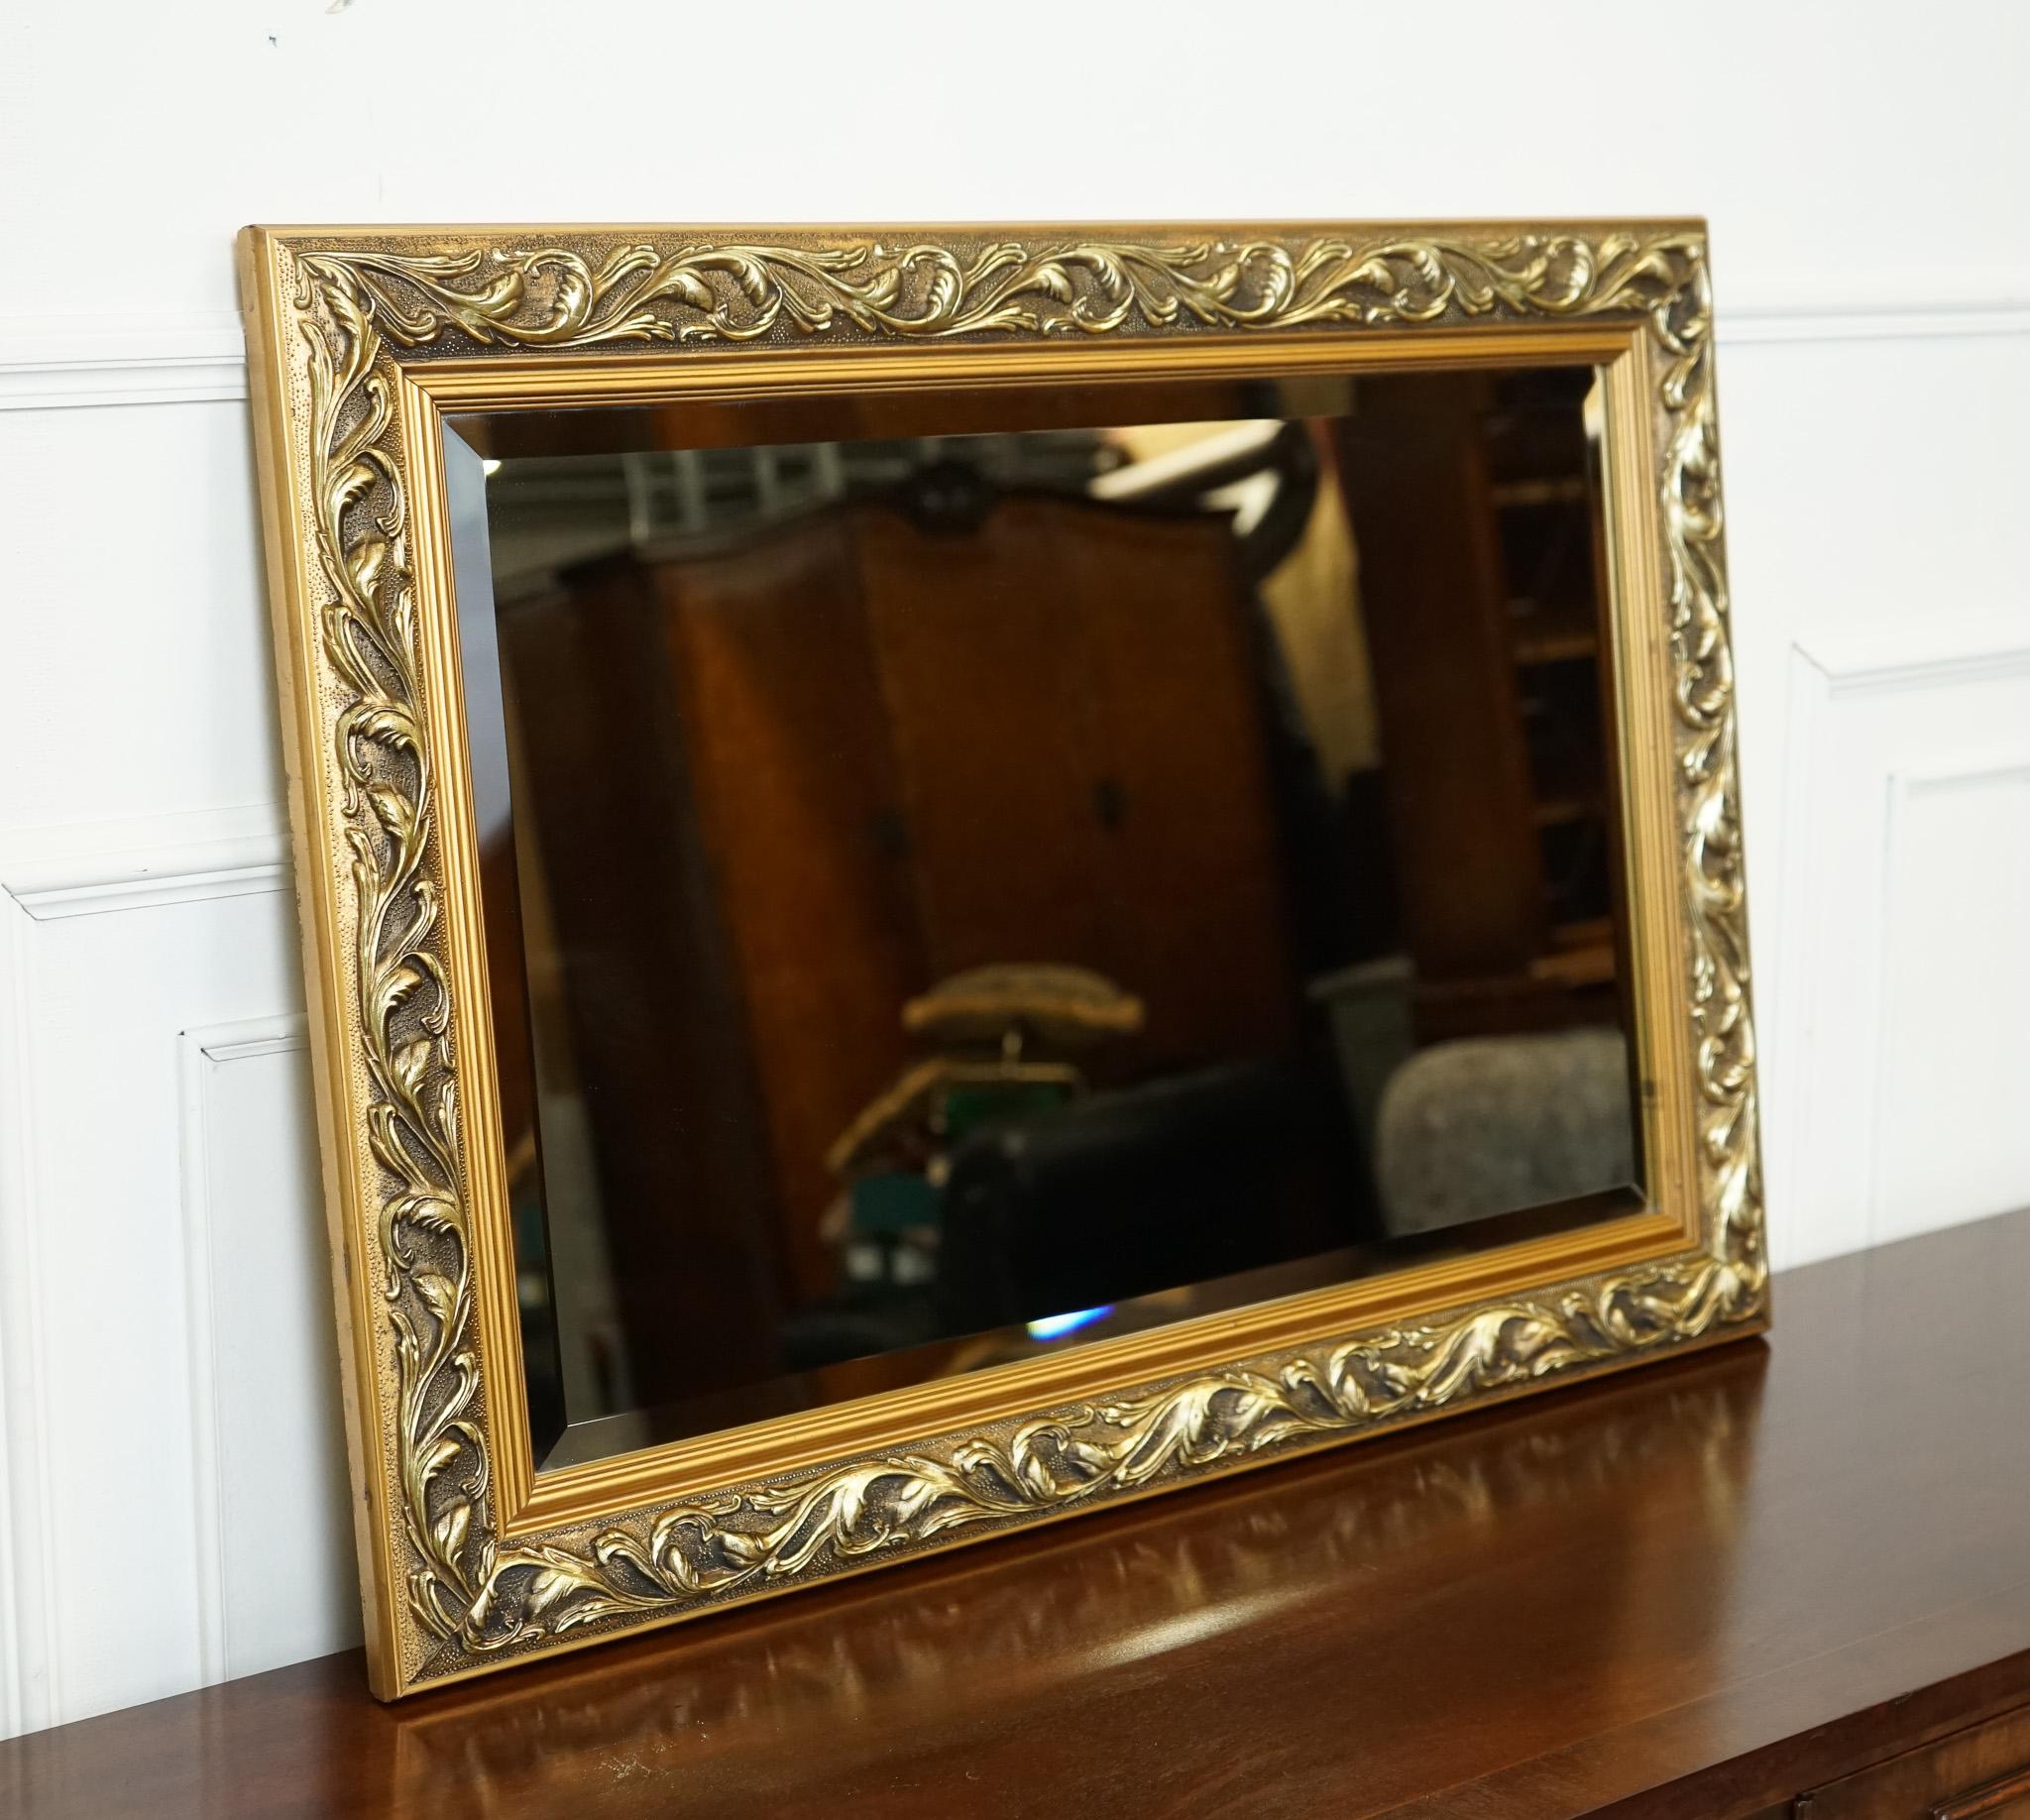 
We are delighted to offer for sale this Beautiful Vintage Giltwood Mirror.

A beautiful cushioned giltwood bevelled mirror is a stunning piece of decor that adds a touch of opulence and grandeur to any space. This mirror embodies the elegance and